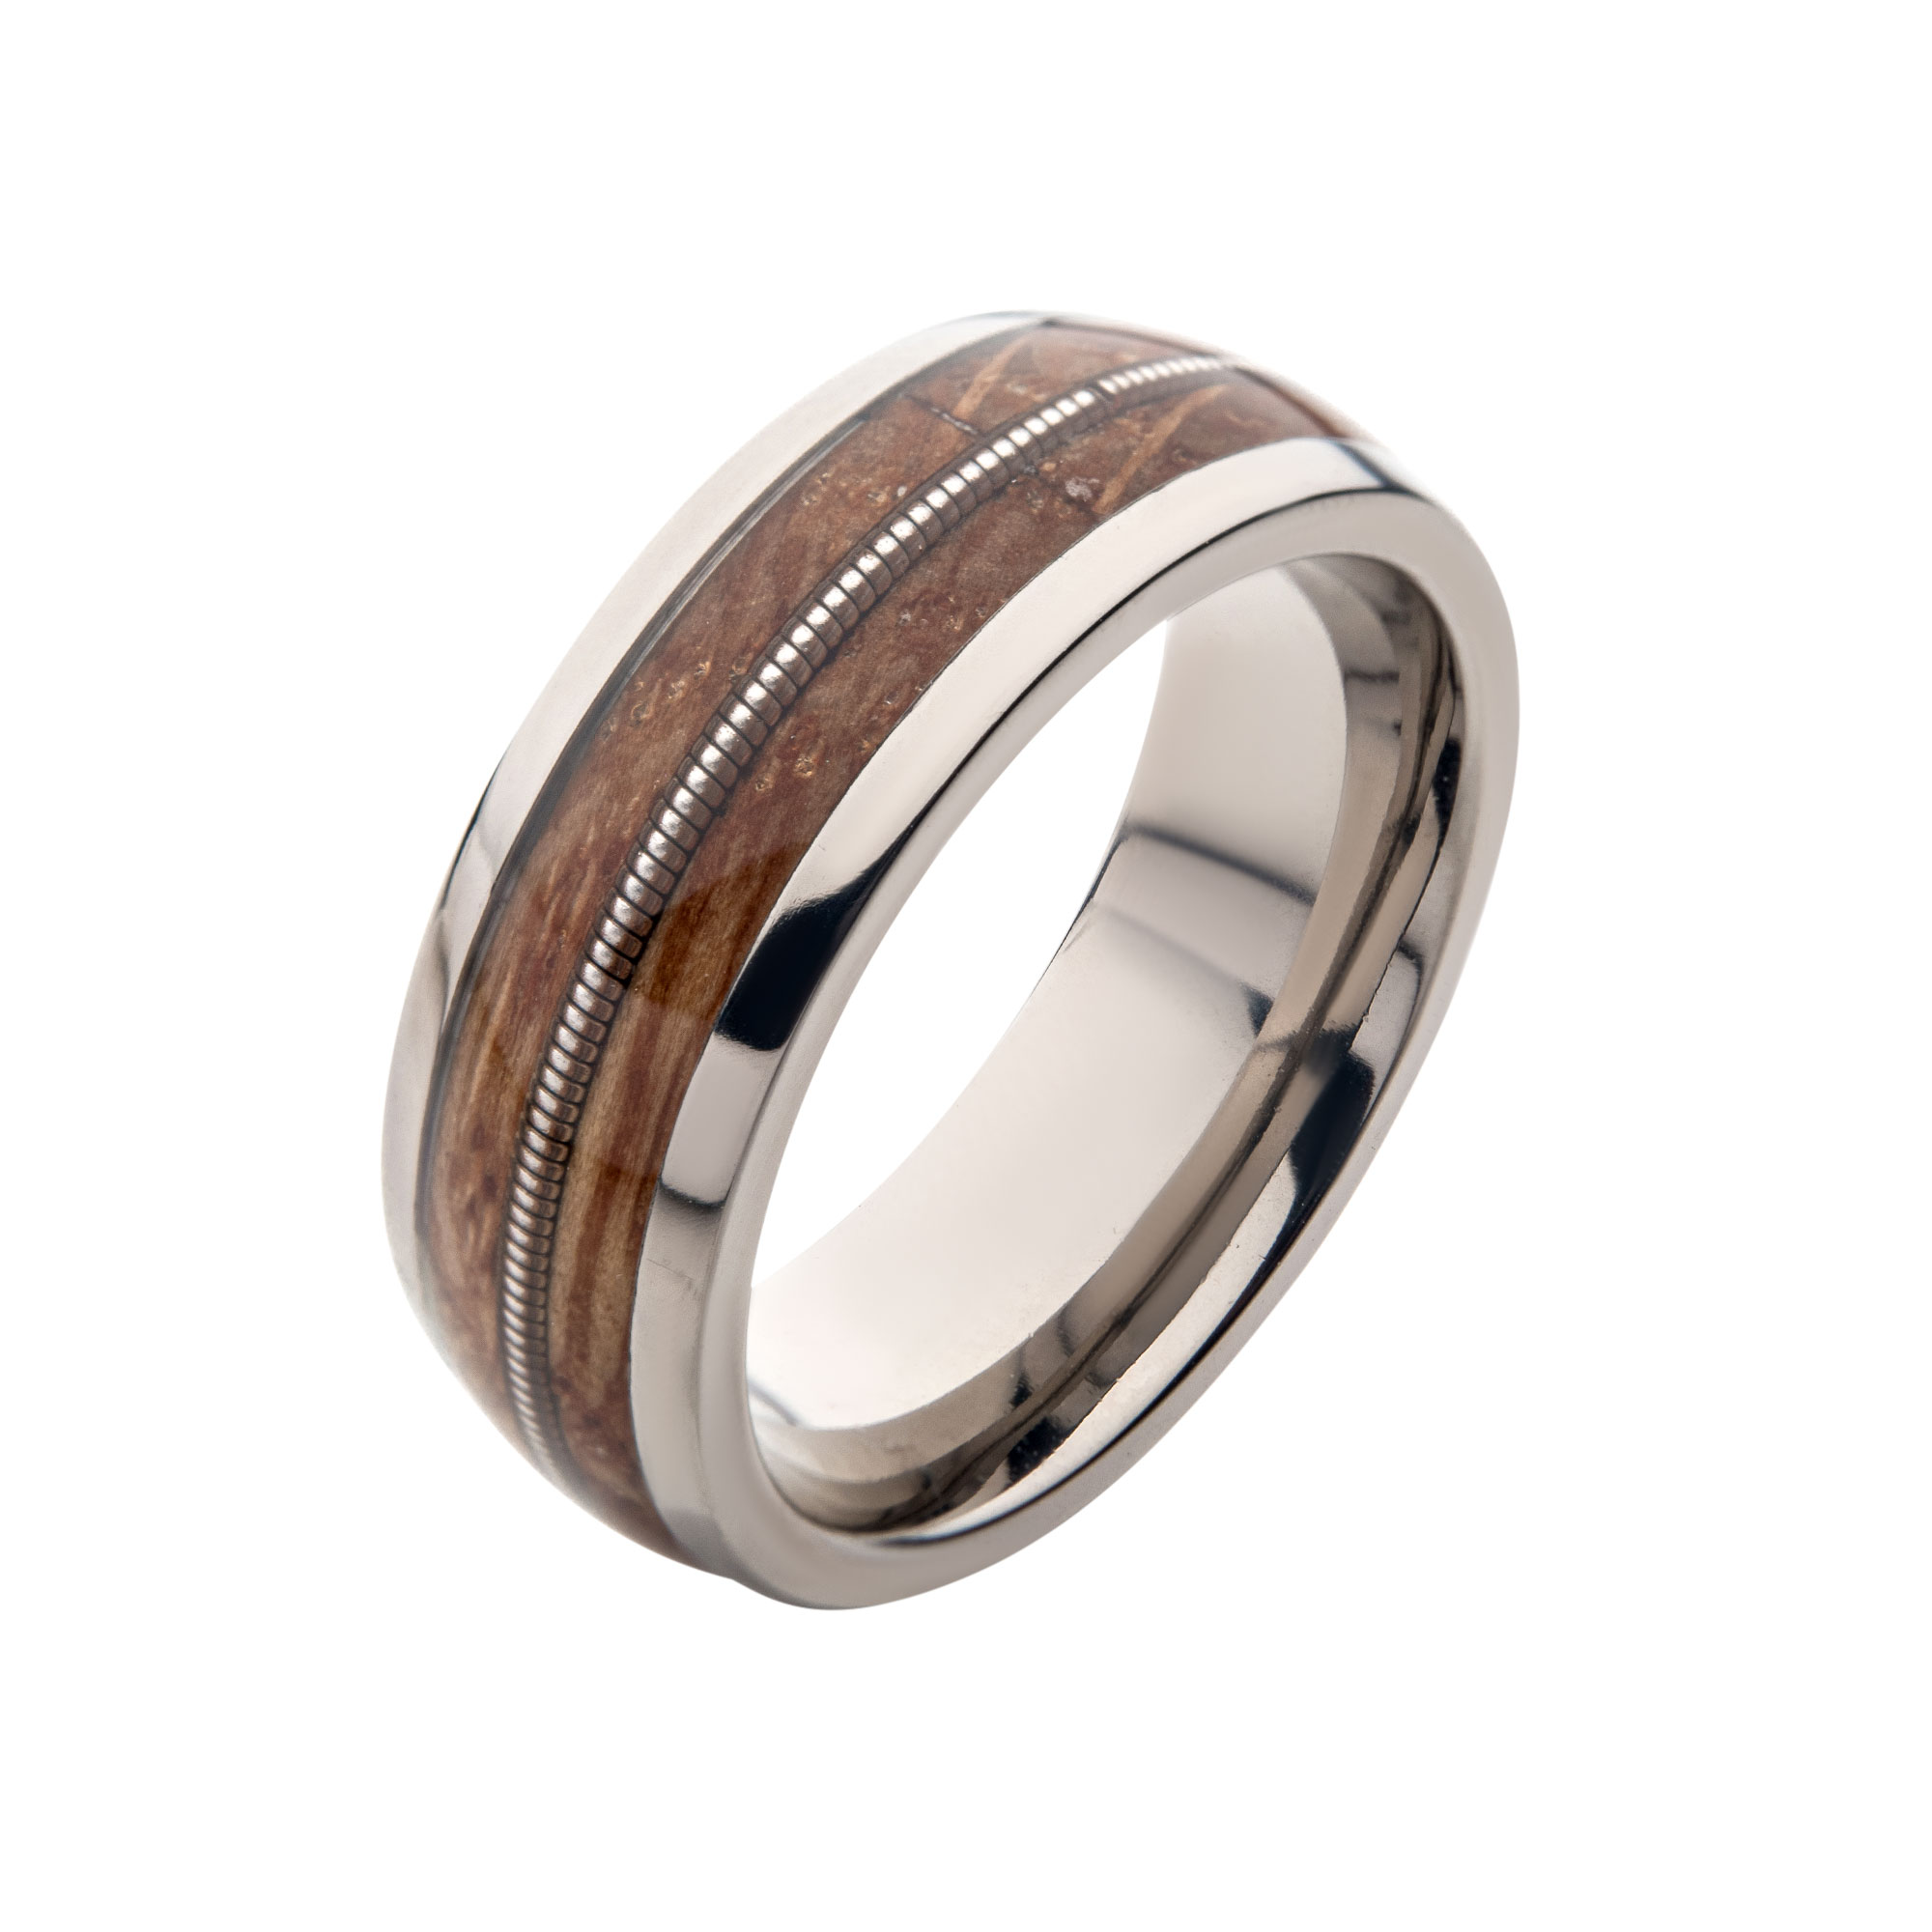 Clear Resins & Whiskey Barrel Wood Inlay Titanium Ring Thurber's Fine Jewelry Wadsworth, OH